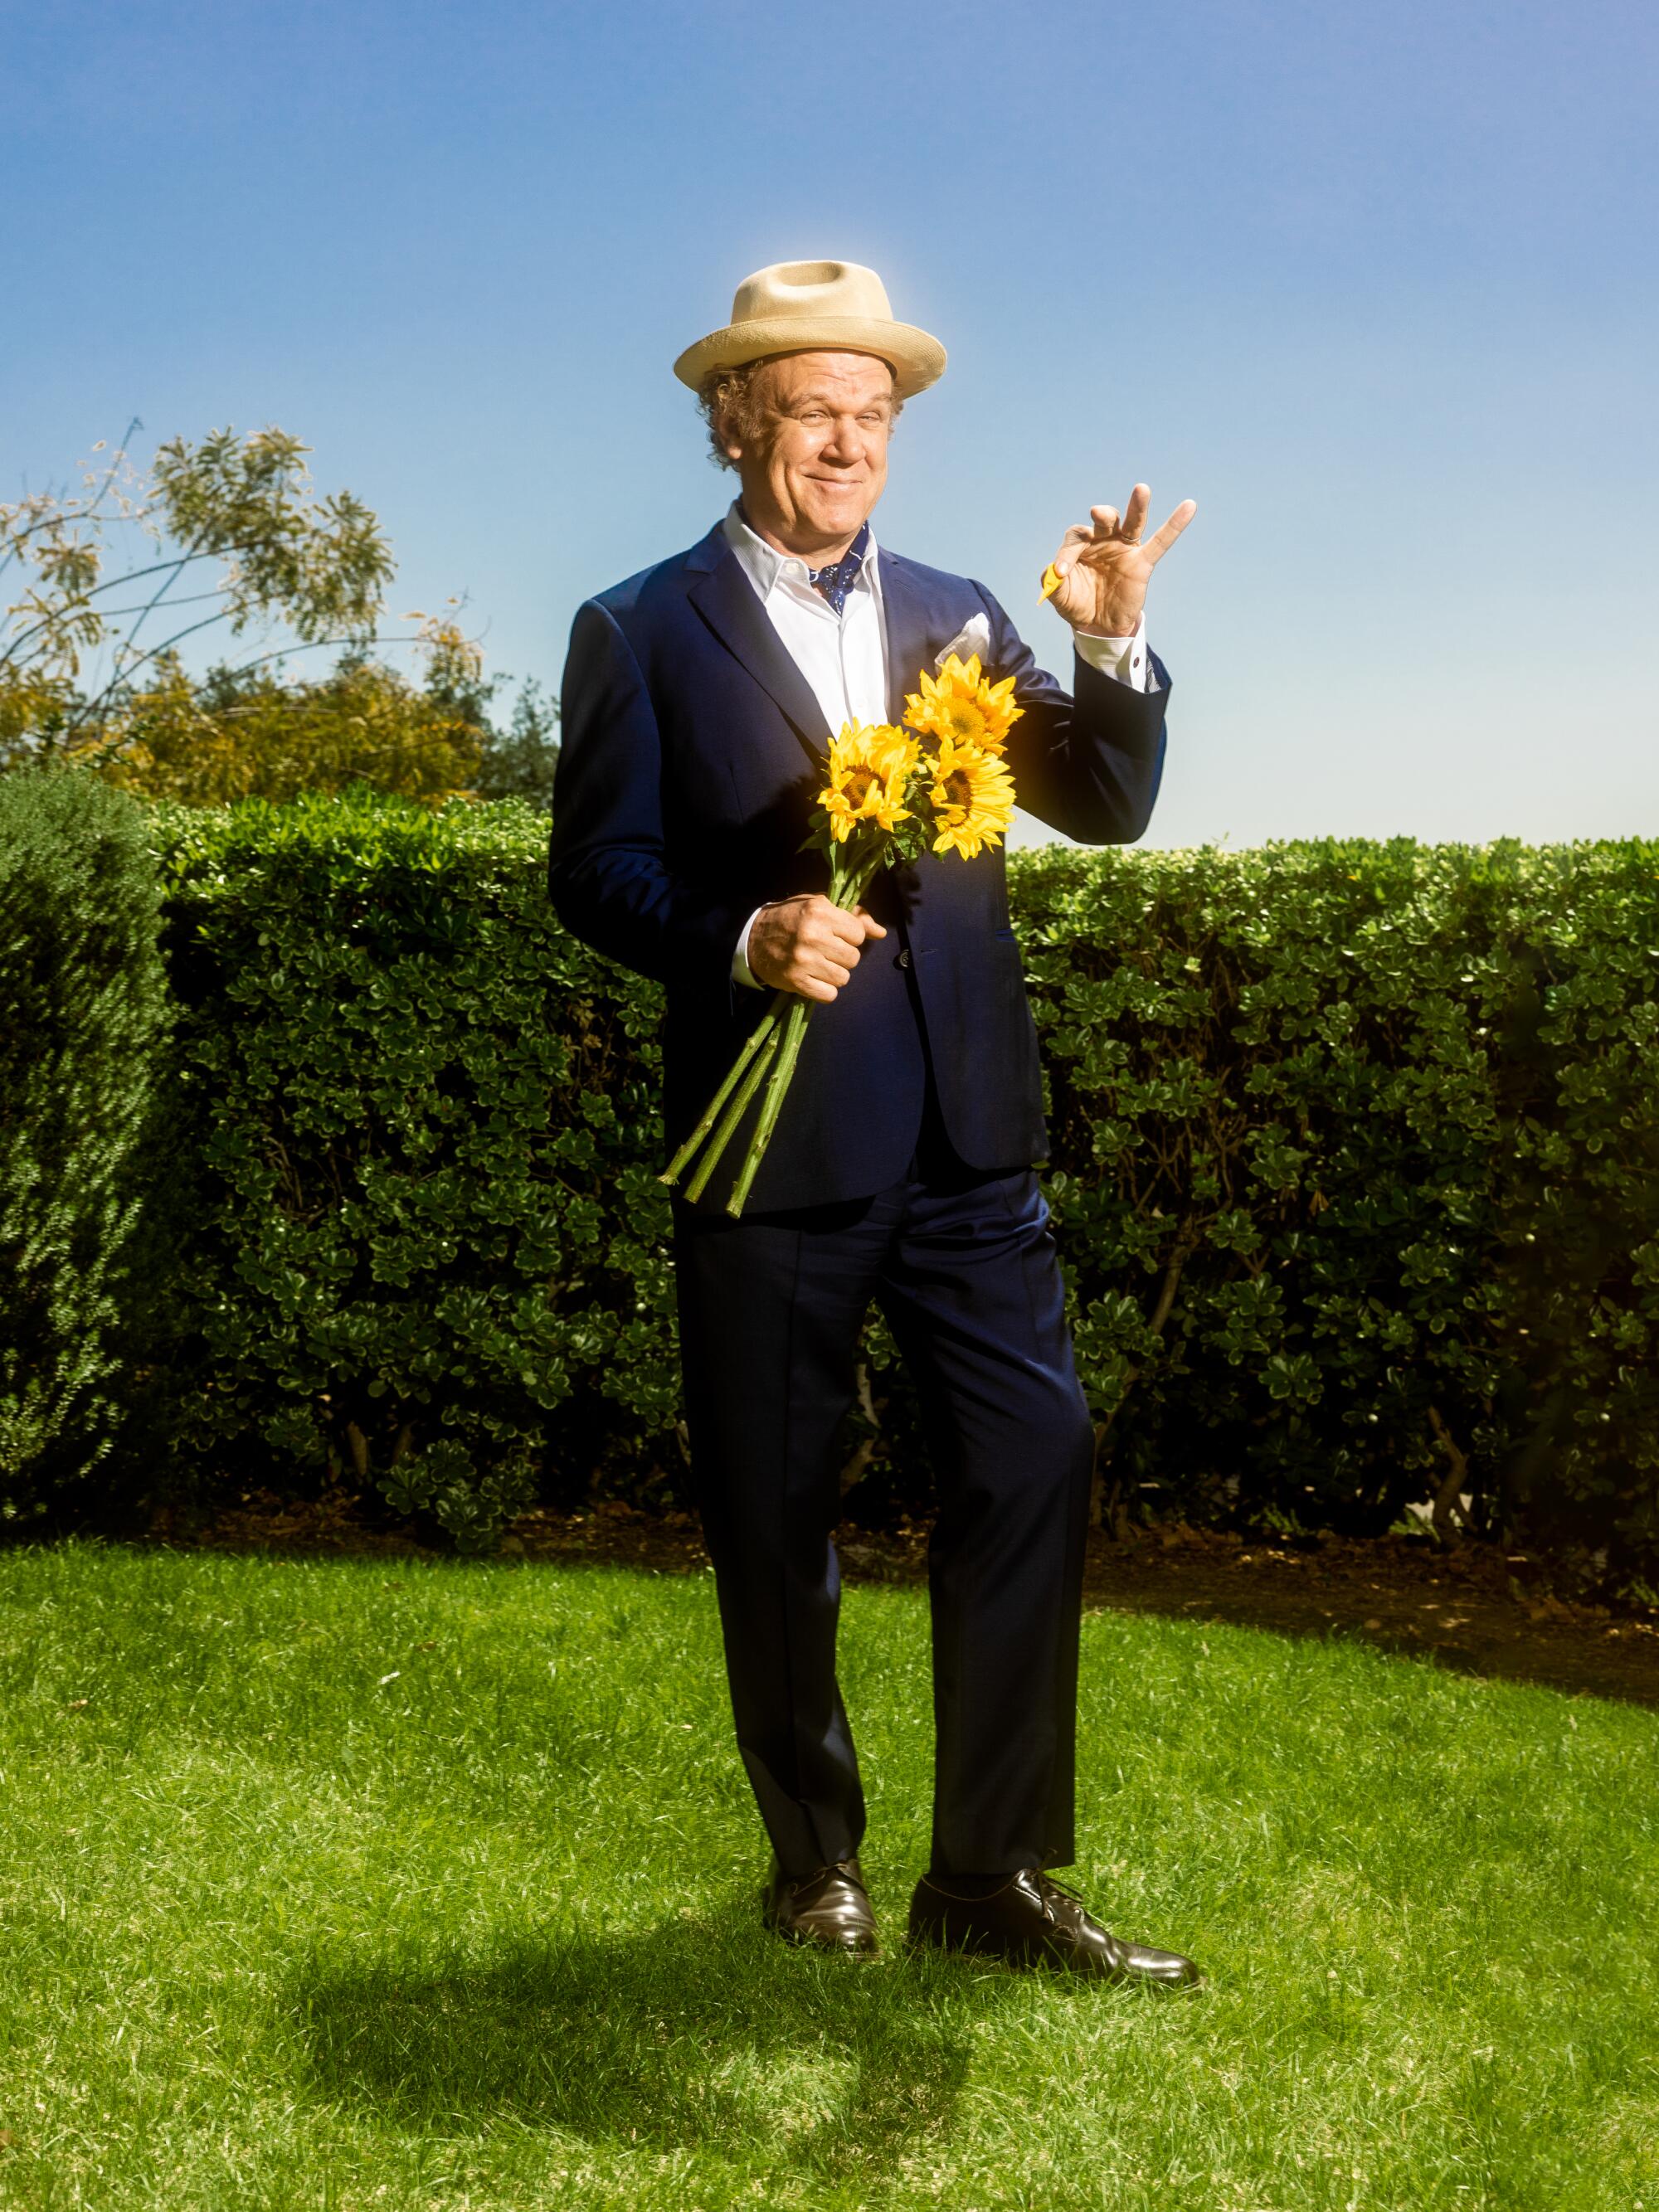 John C. Reilly stands in a grassy patch picking petals off of sunflowers.